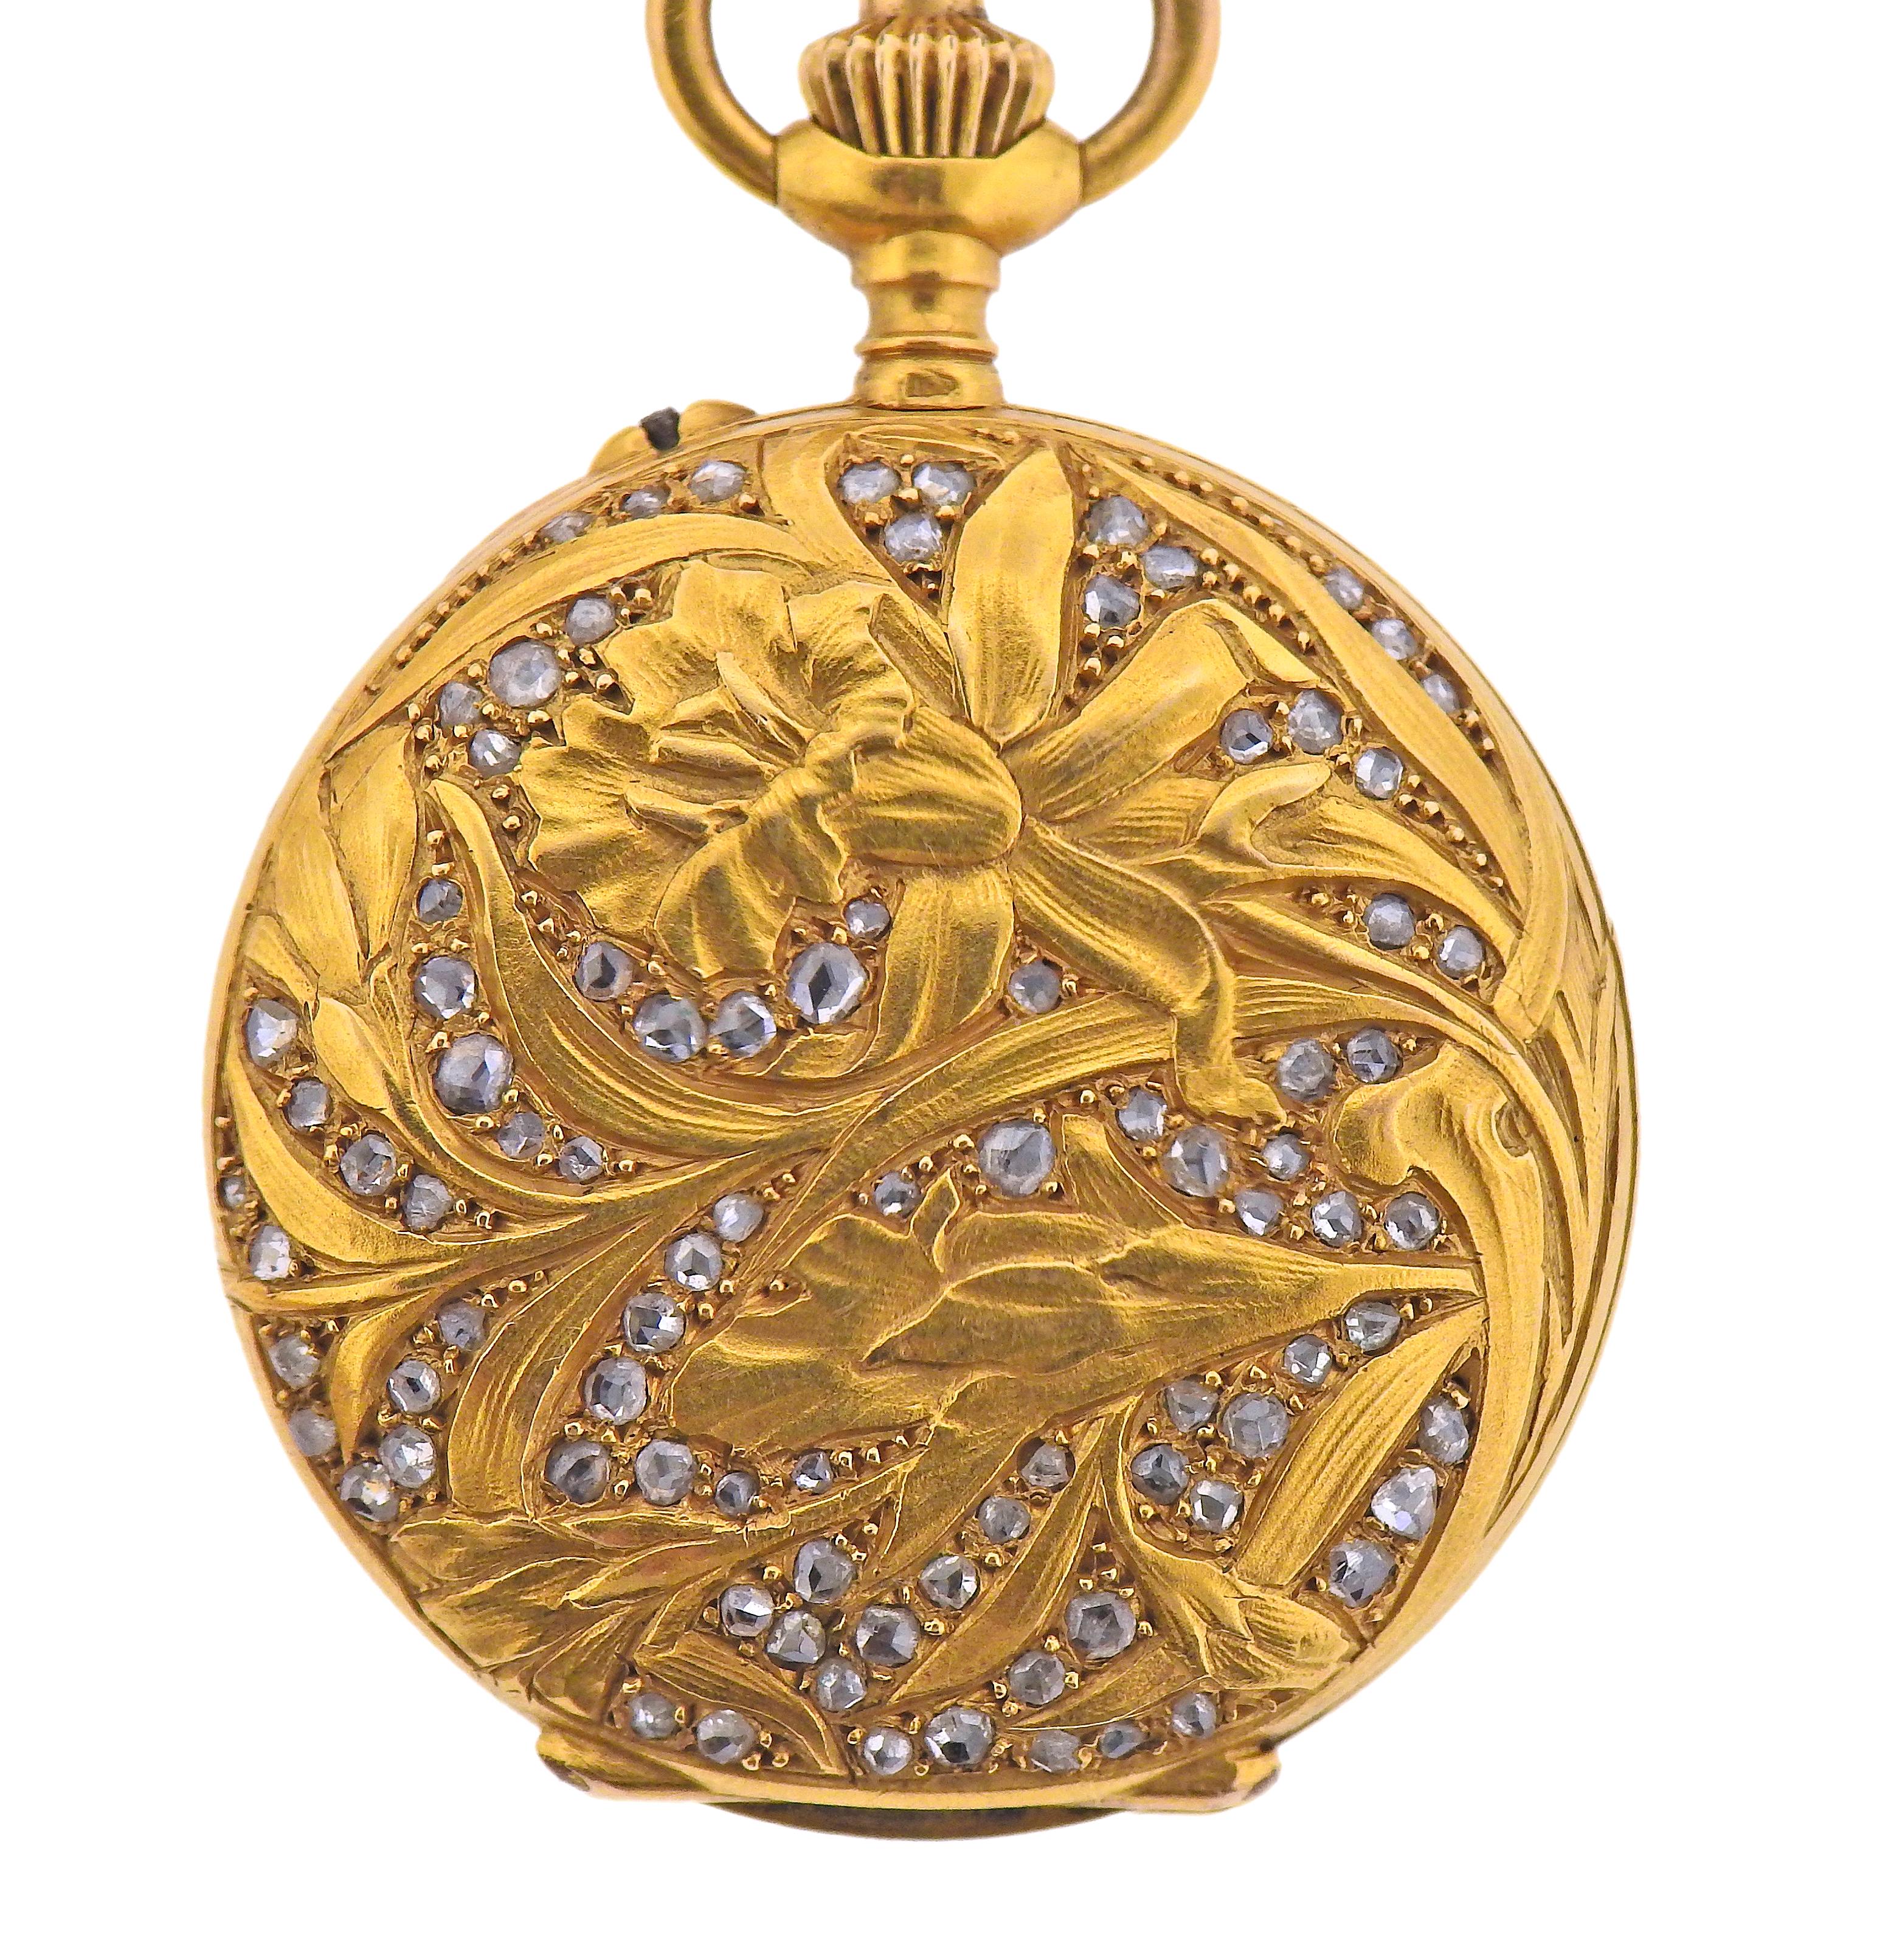 Antique Art Nouveau 18k gold pocket watch fob pendant, case of the watch is decorated with rose cut diamonds. Case is 30mm in diameter, Overall size of the piece - 3.25